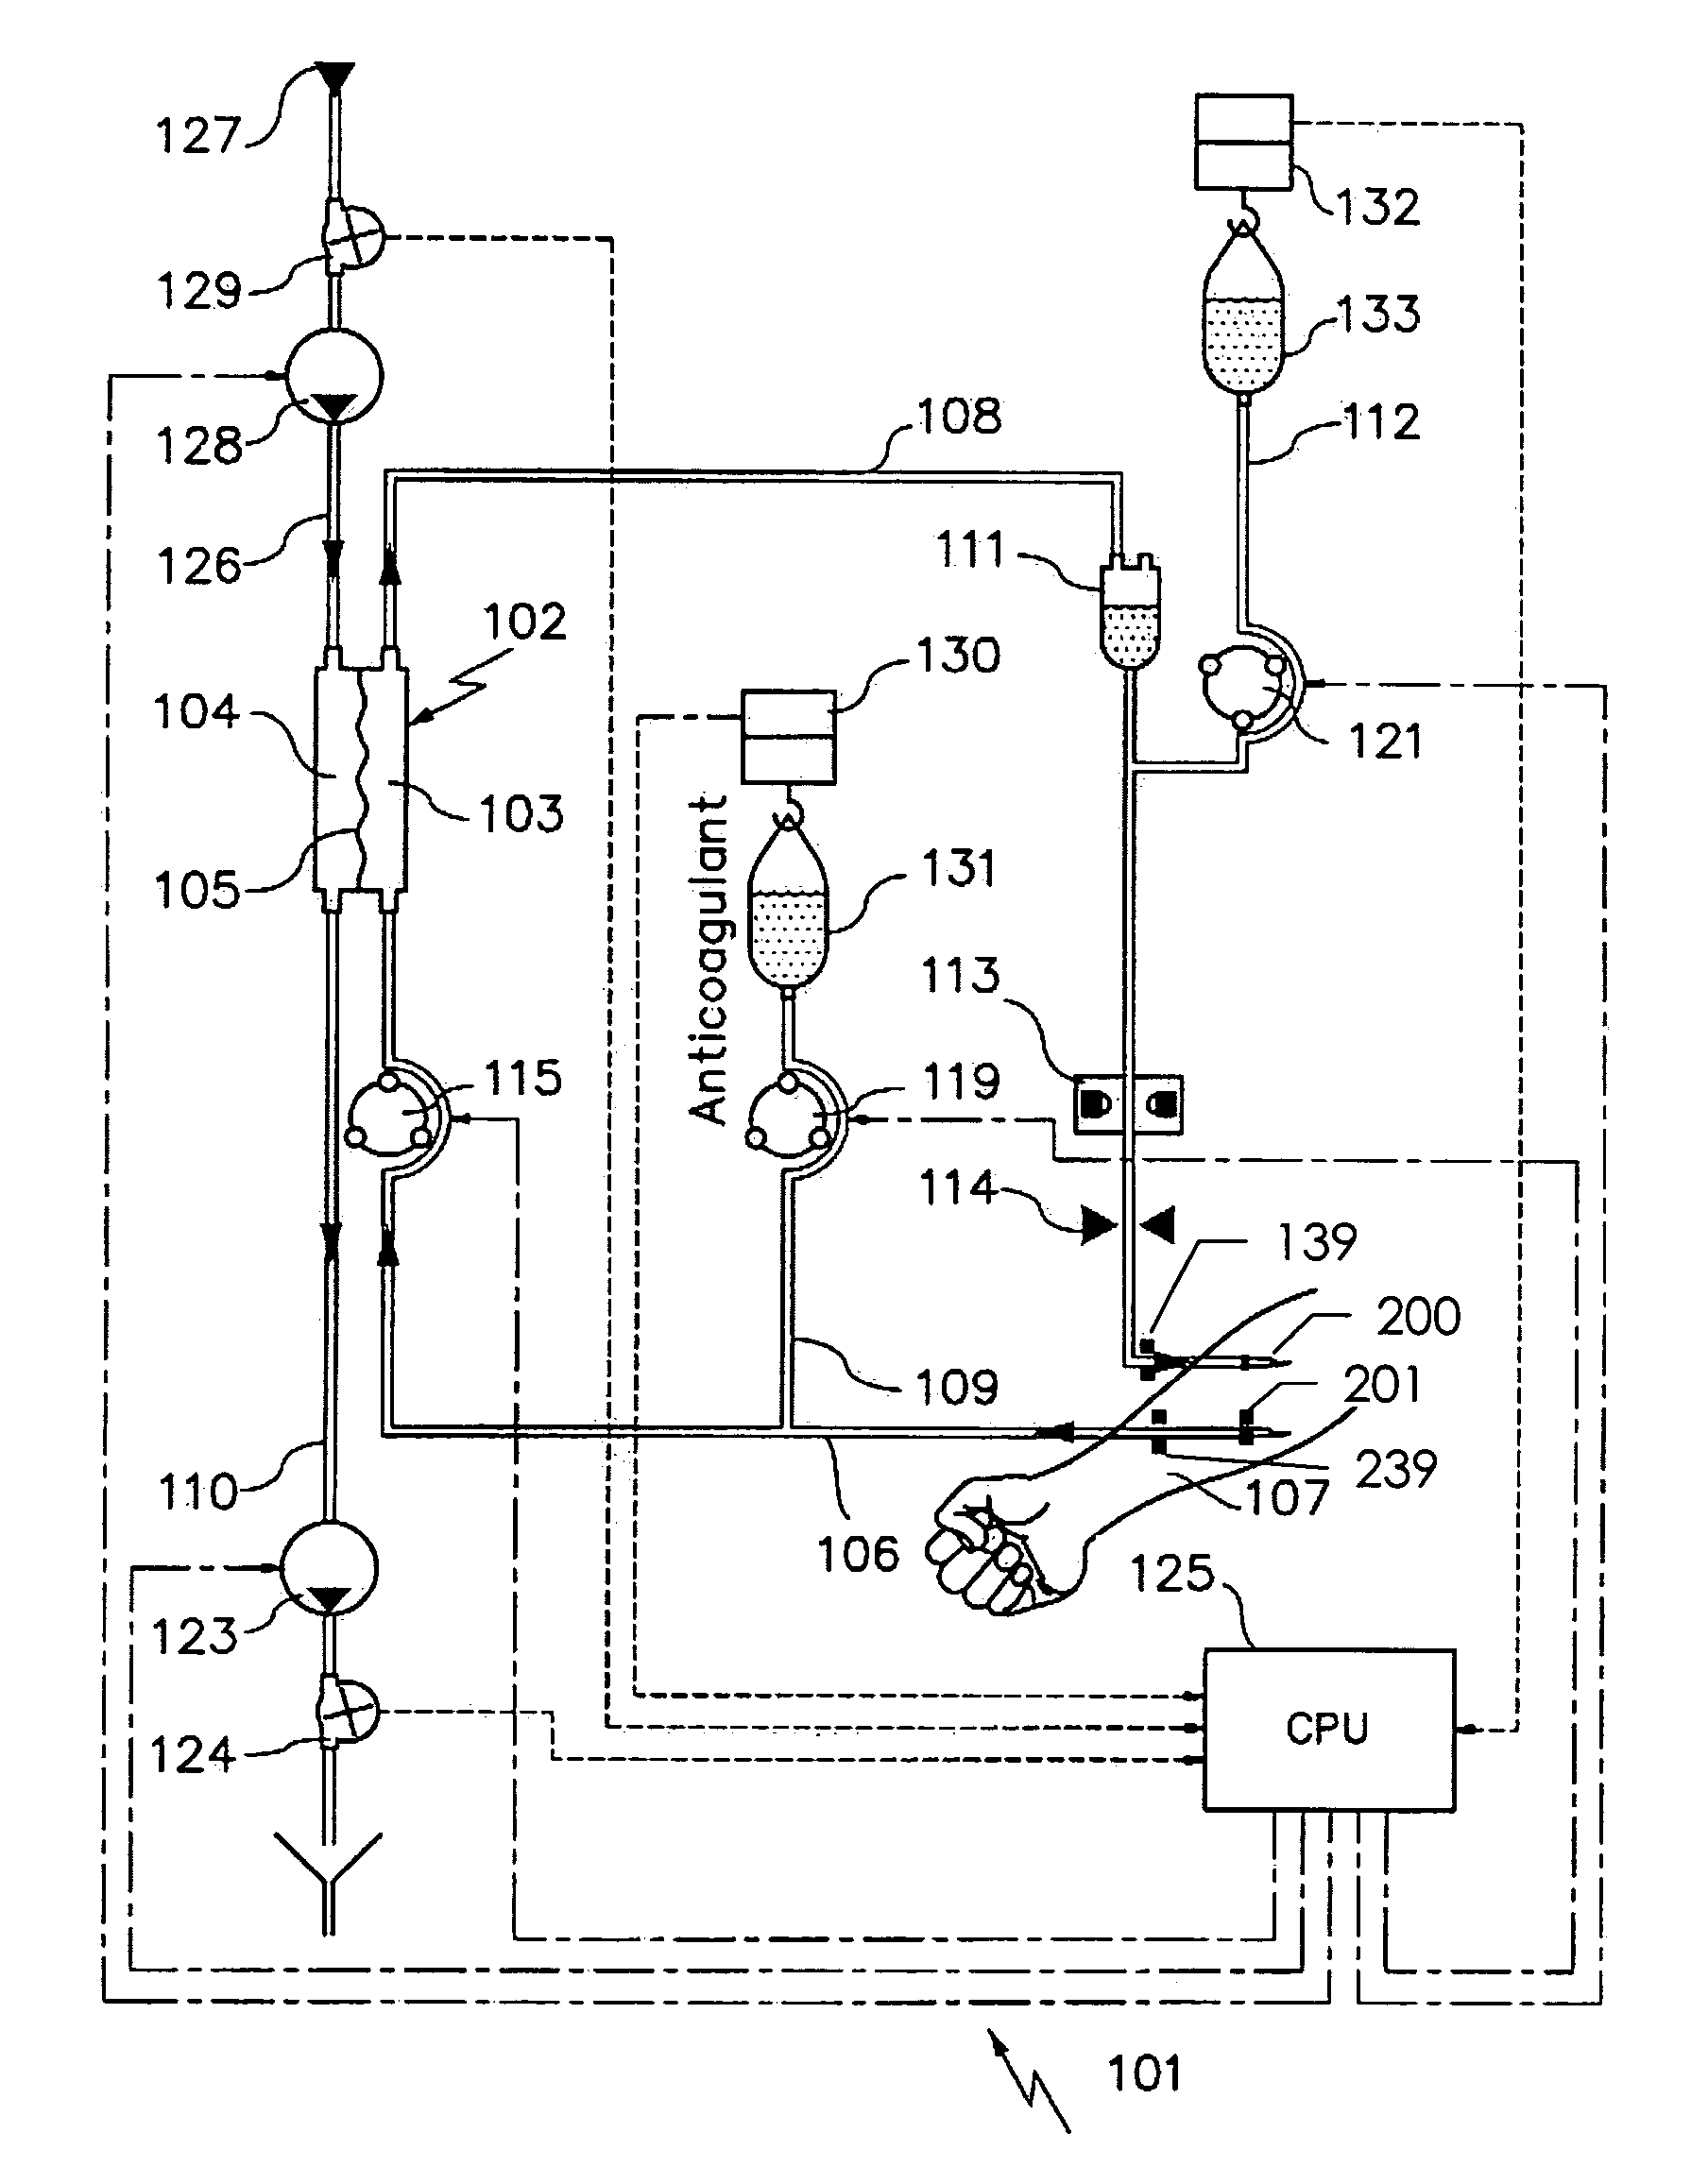 Device and process for extracorporeal treatment by citrate anticoagulant